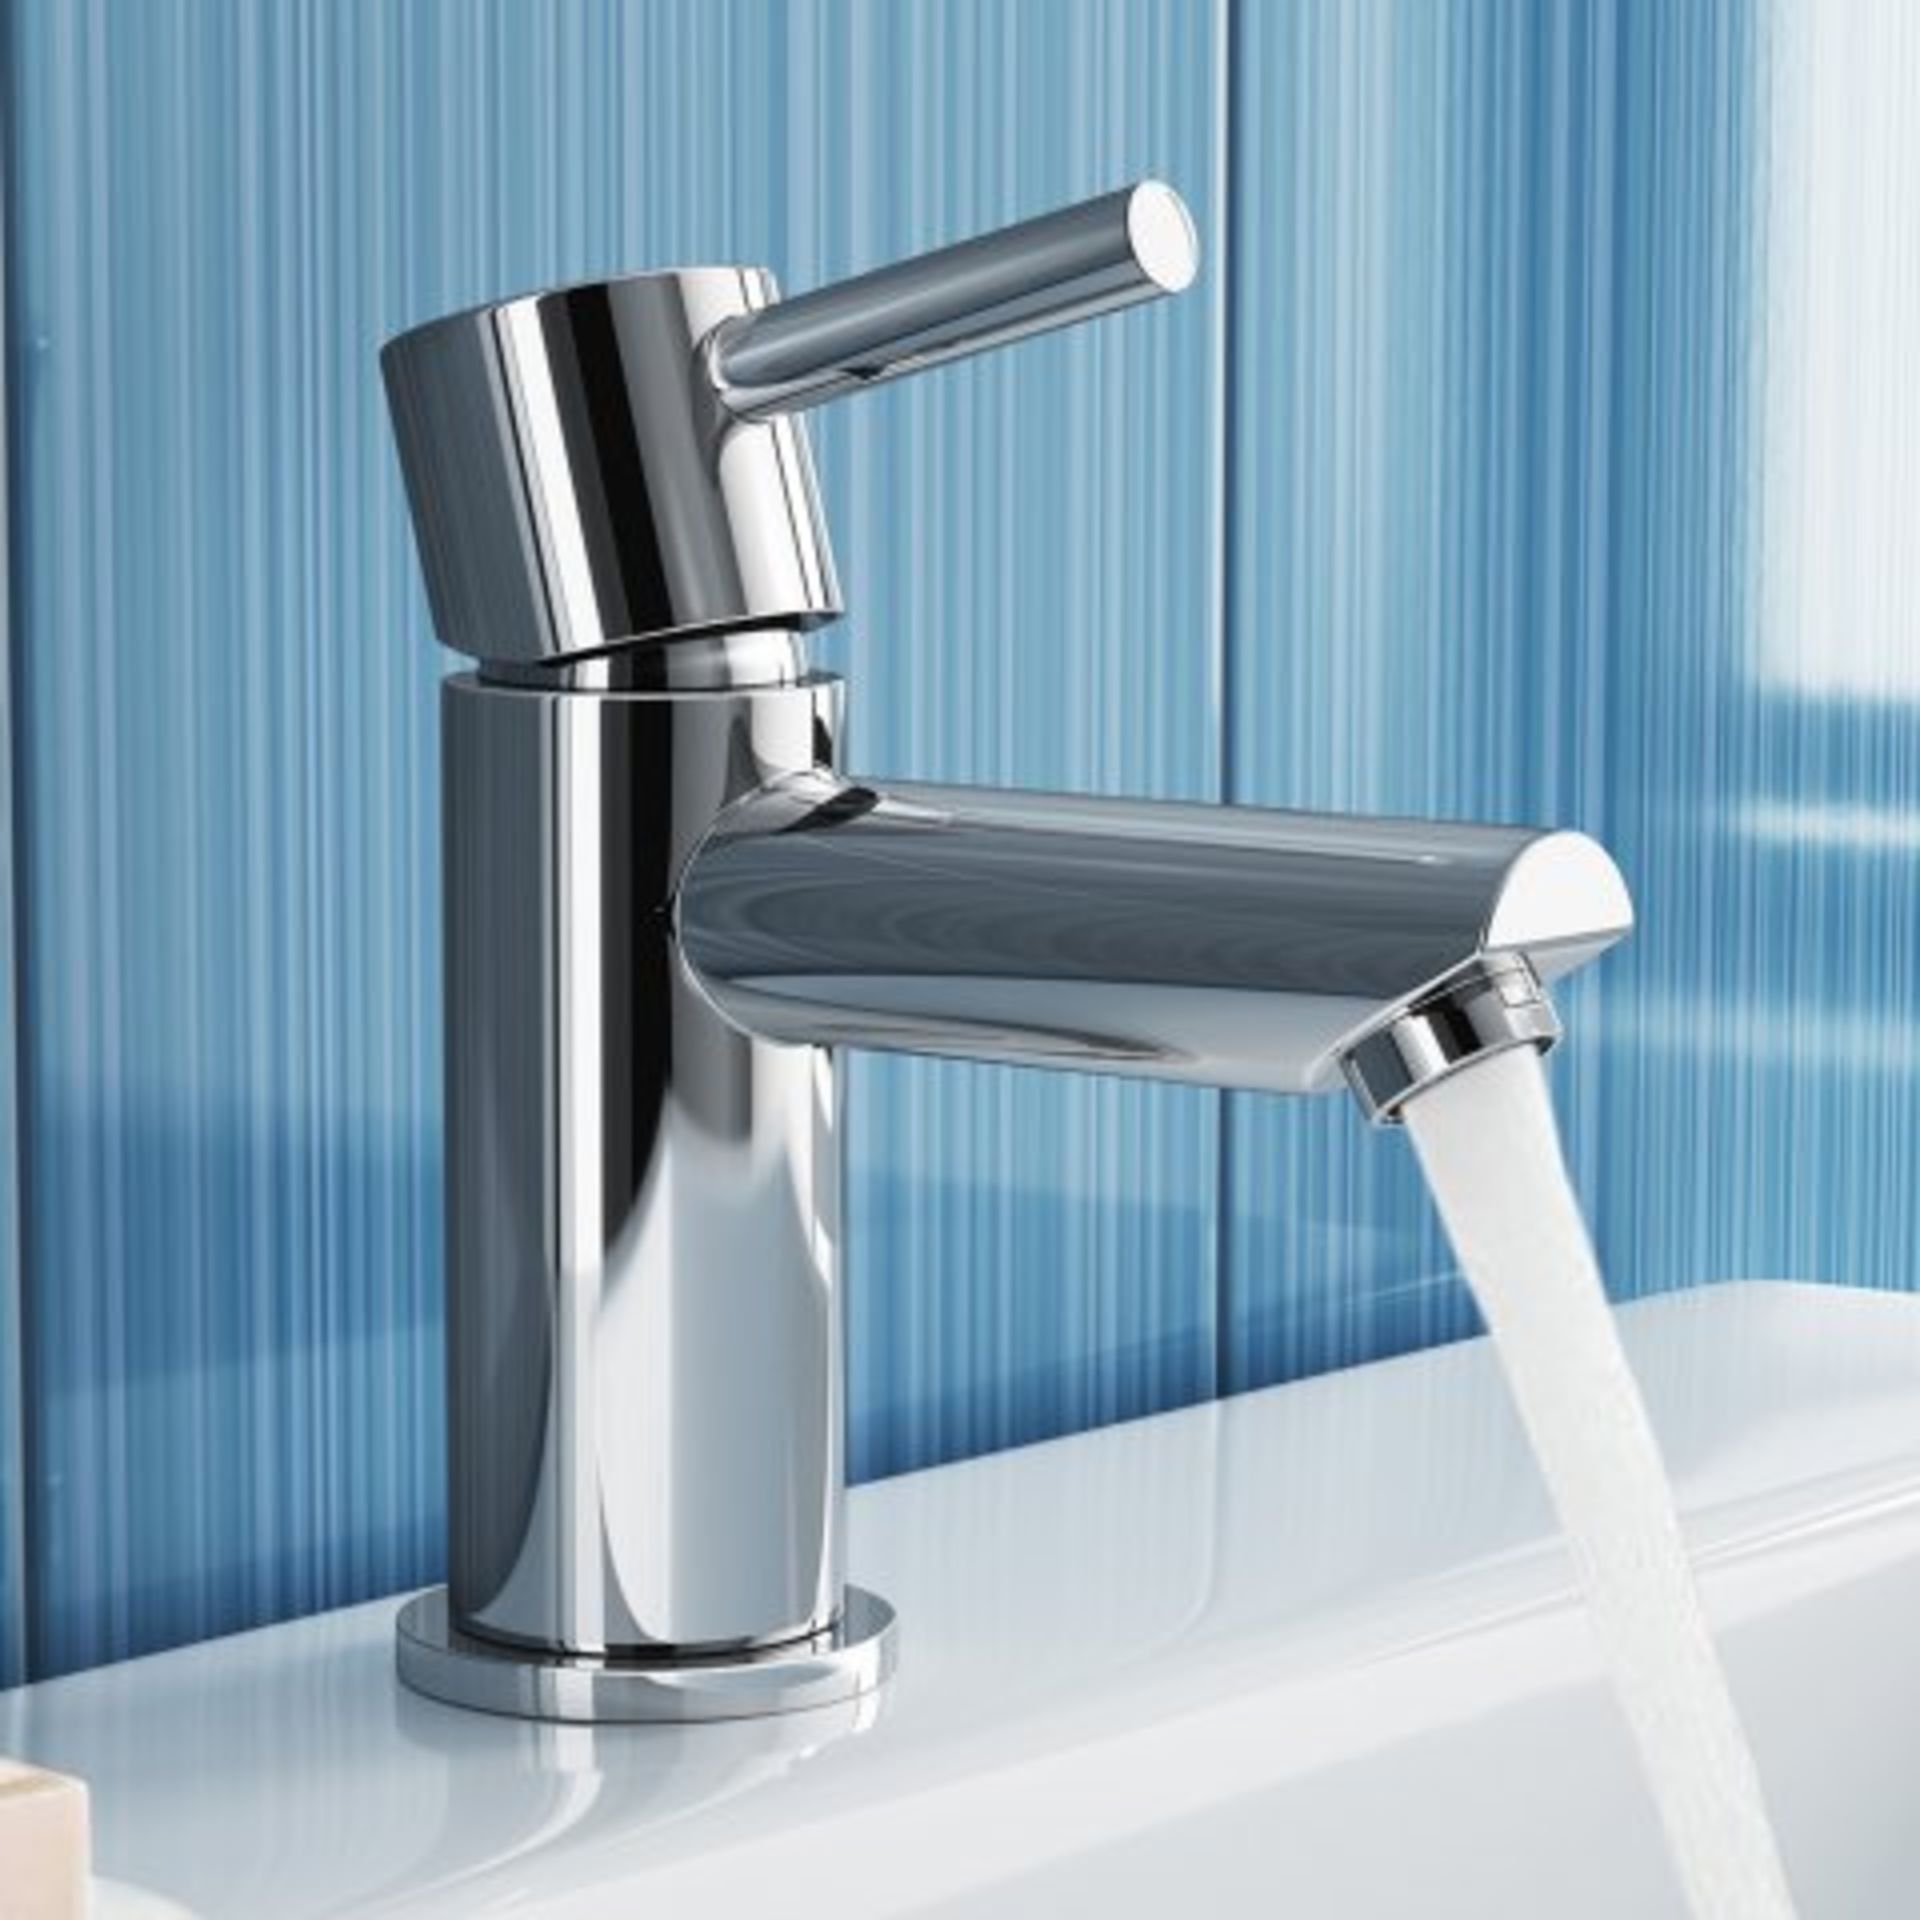 (I58) Gladstone II Cloakroom Basin Mixer Tap Presenting a contemporary design, this solid brass